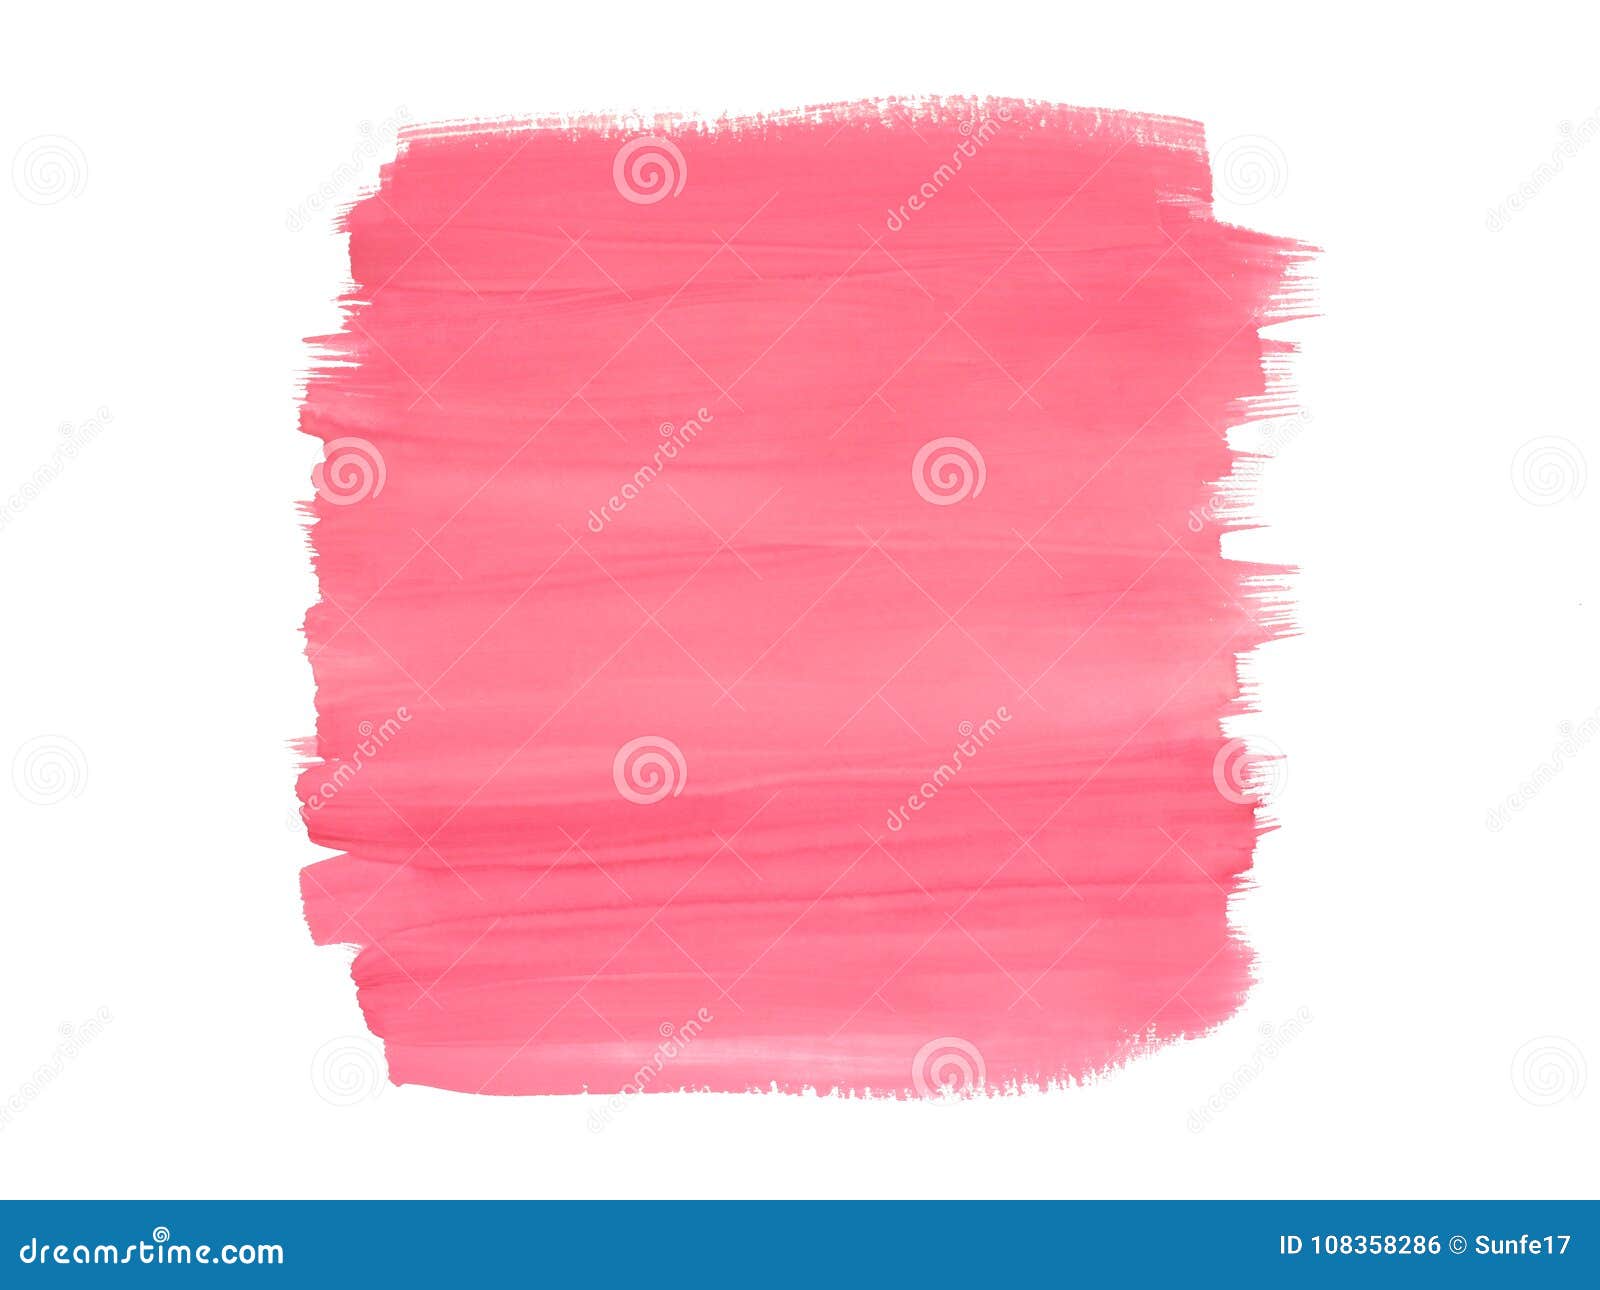 Pink Watercolor Brush Strokes on White Background Stock Photo - Image ...